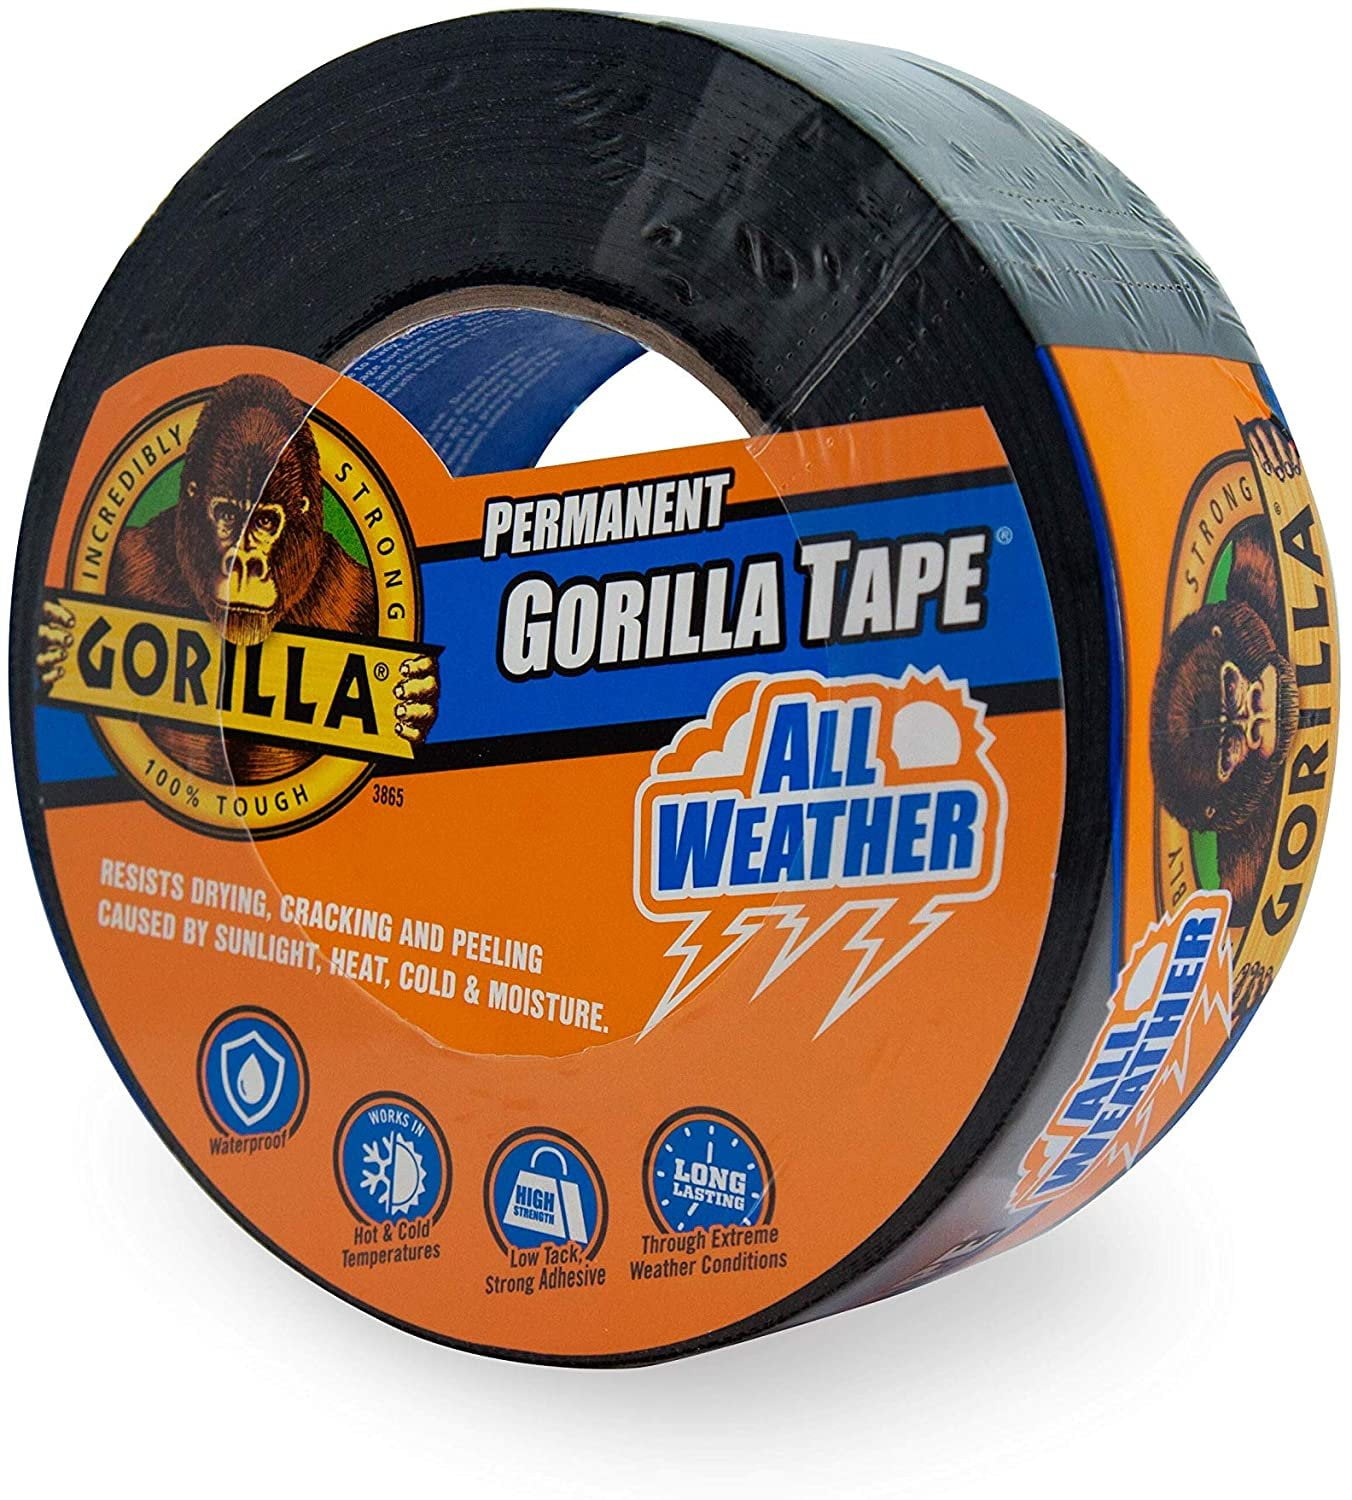 Black Gorilla Duct Tape Roll Tough Wide Waterproof Adhesive Cloth Scotch Crafts 